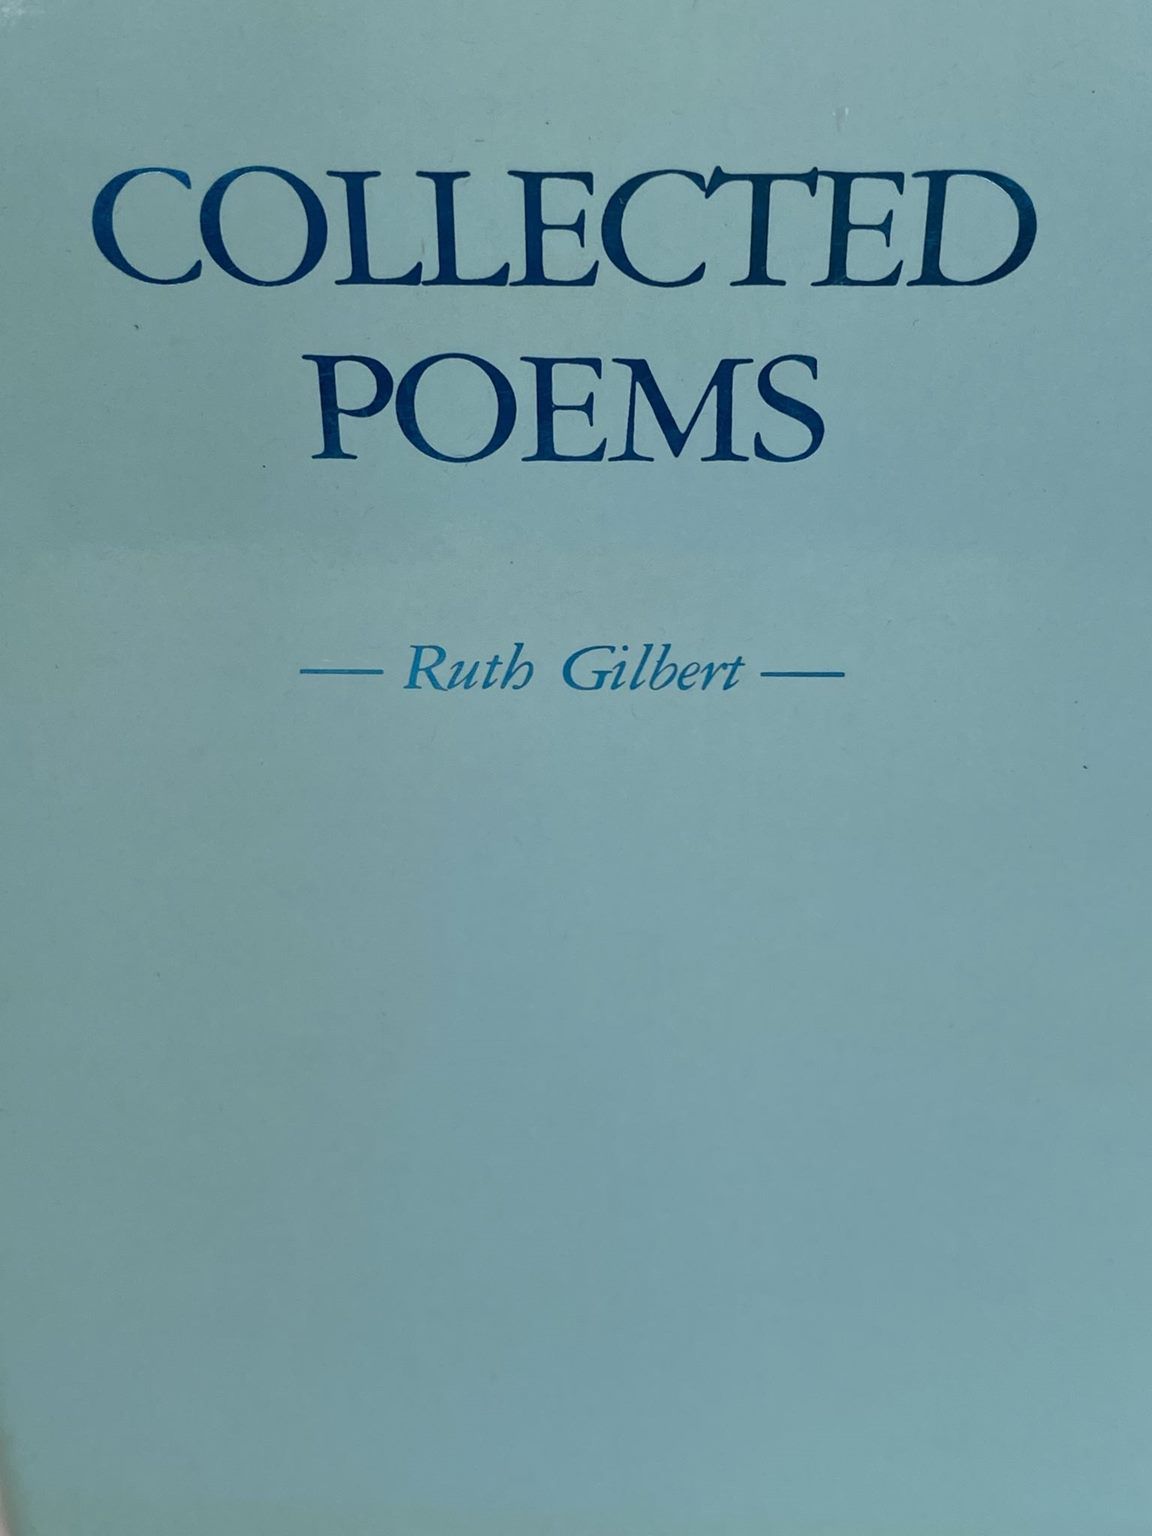 COLLECTED POEMS: Ruth Gilbert